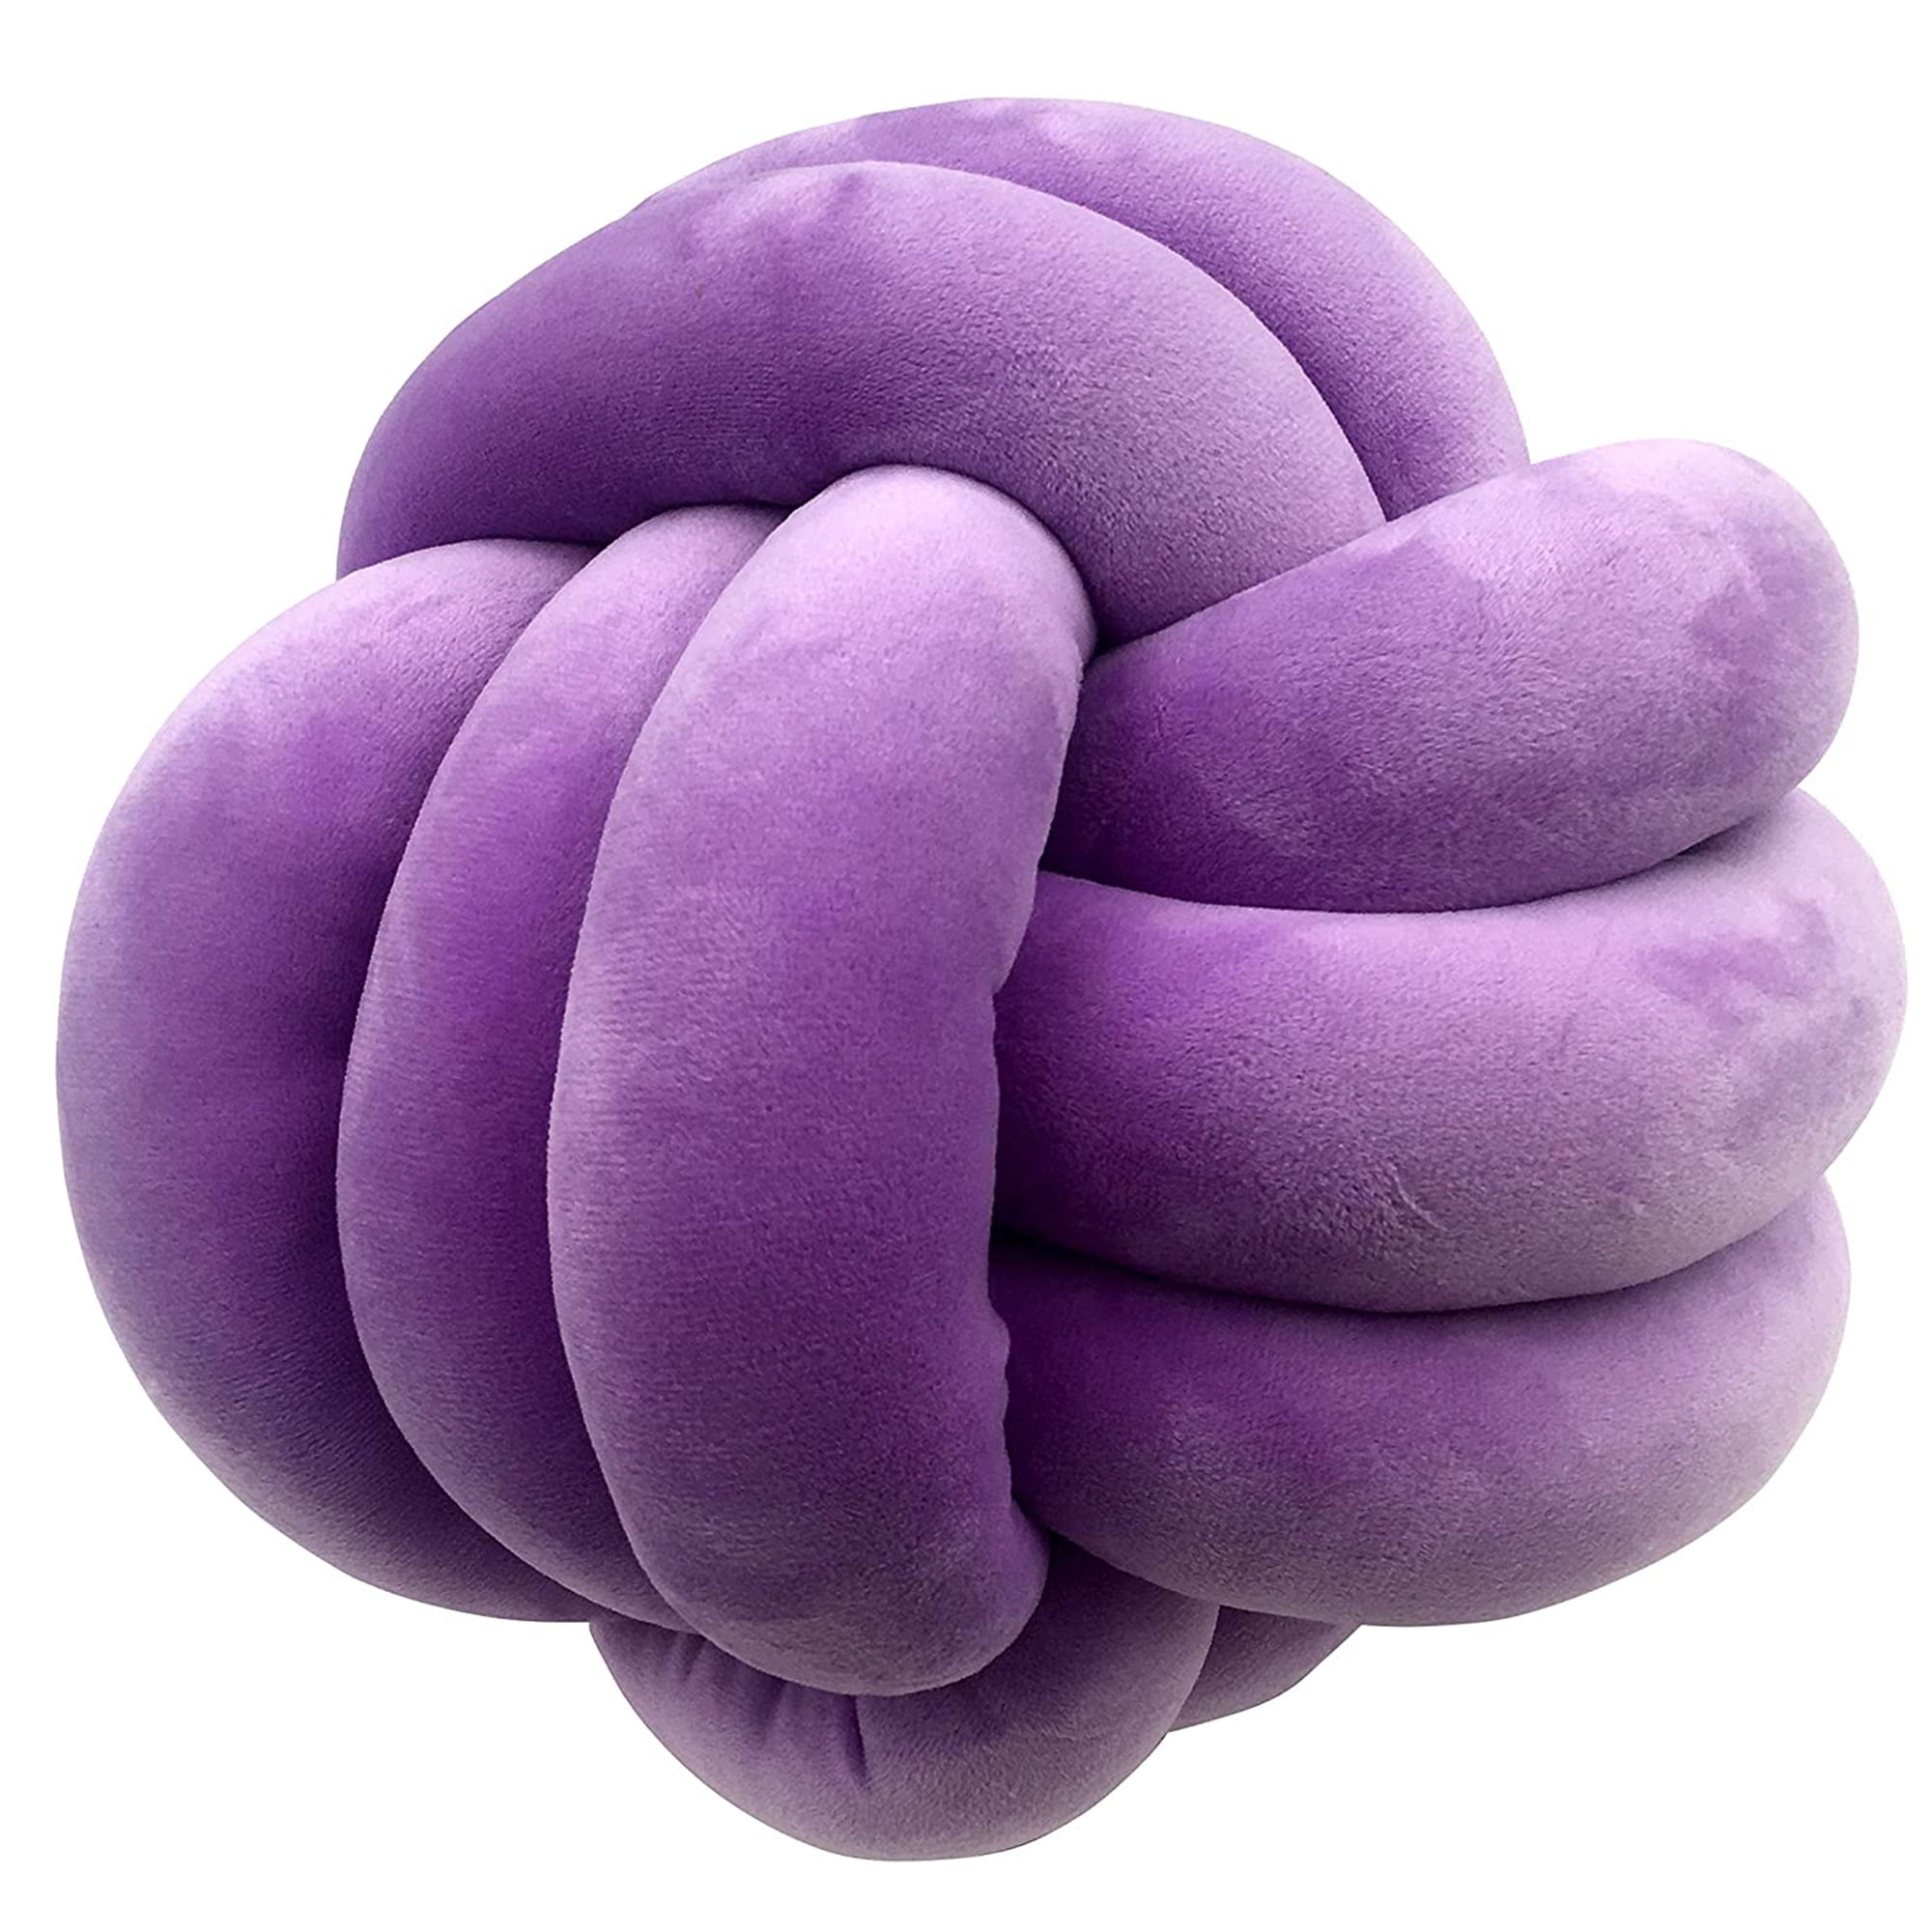 Plush Toy Hugging Pillow Sensory Pillow Lilac Playlearn Cuddle Ball Knot Pillow Calming Stress Relief Toy for Kids 10 Inch 